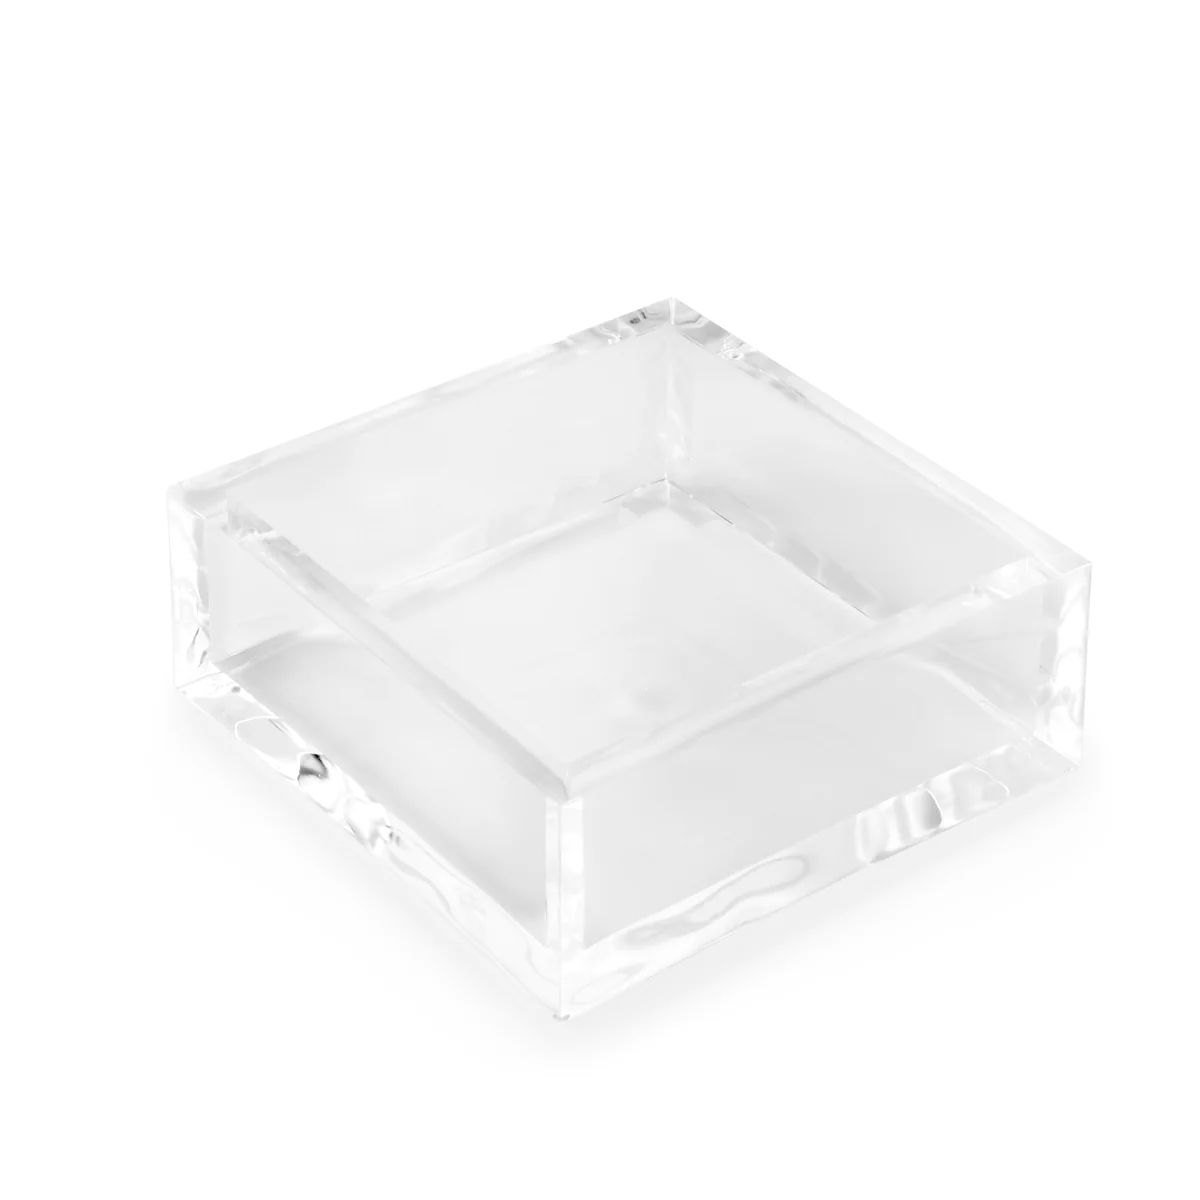 DELUXE 6.5x6.5 DINNER NAPKIN HOLDER TRAY (10MM THICK) | Clear Home Decor